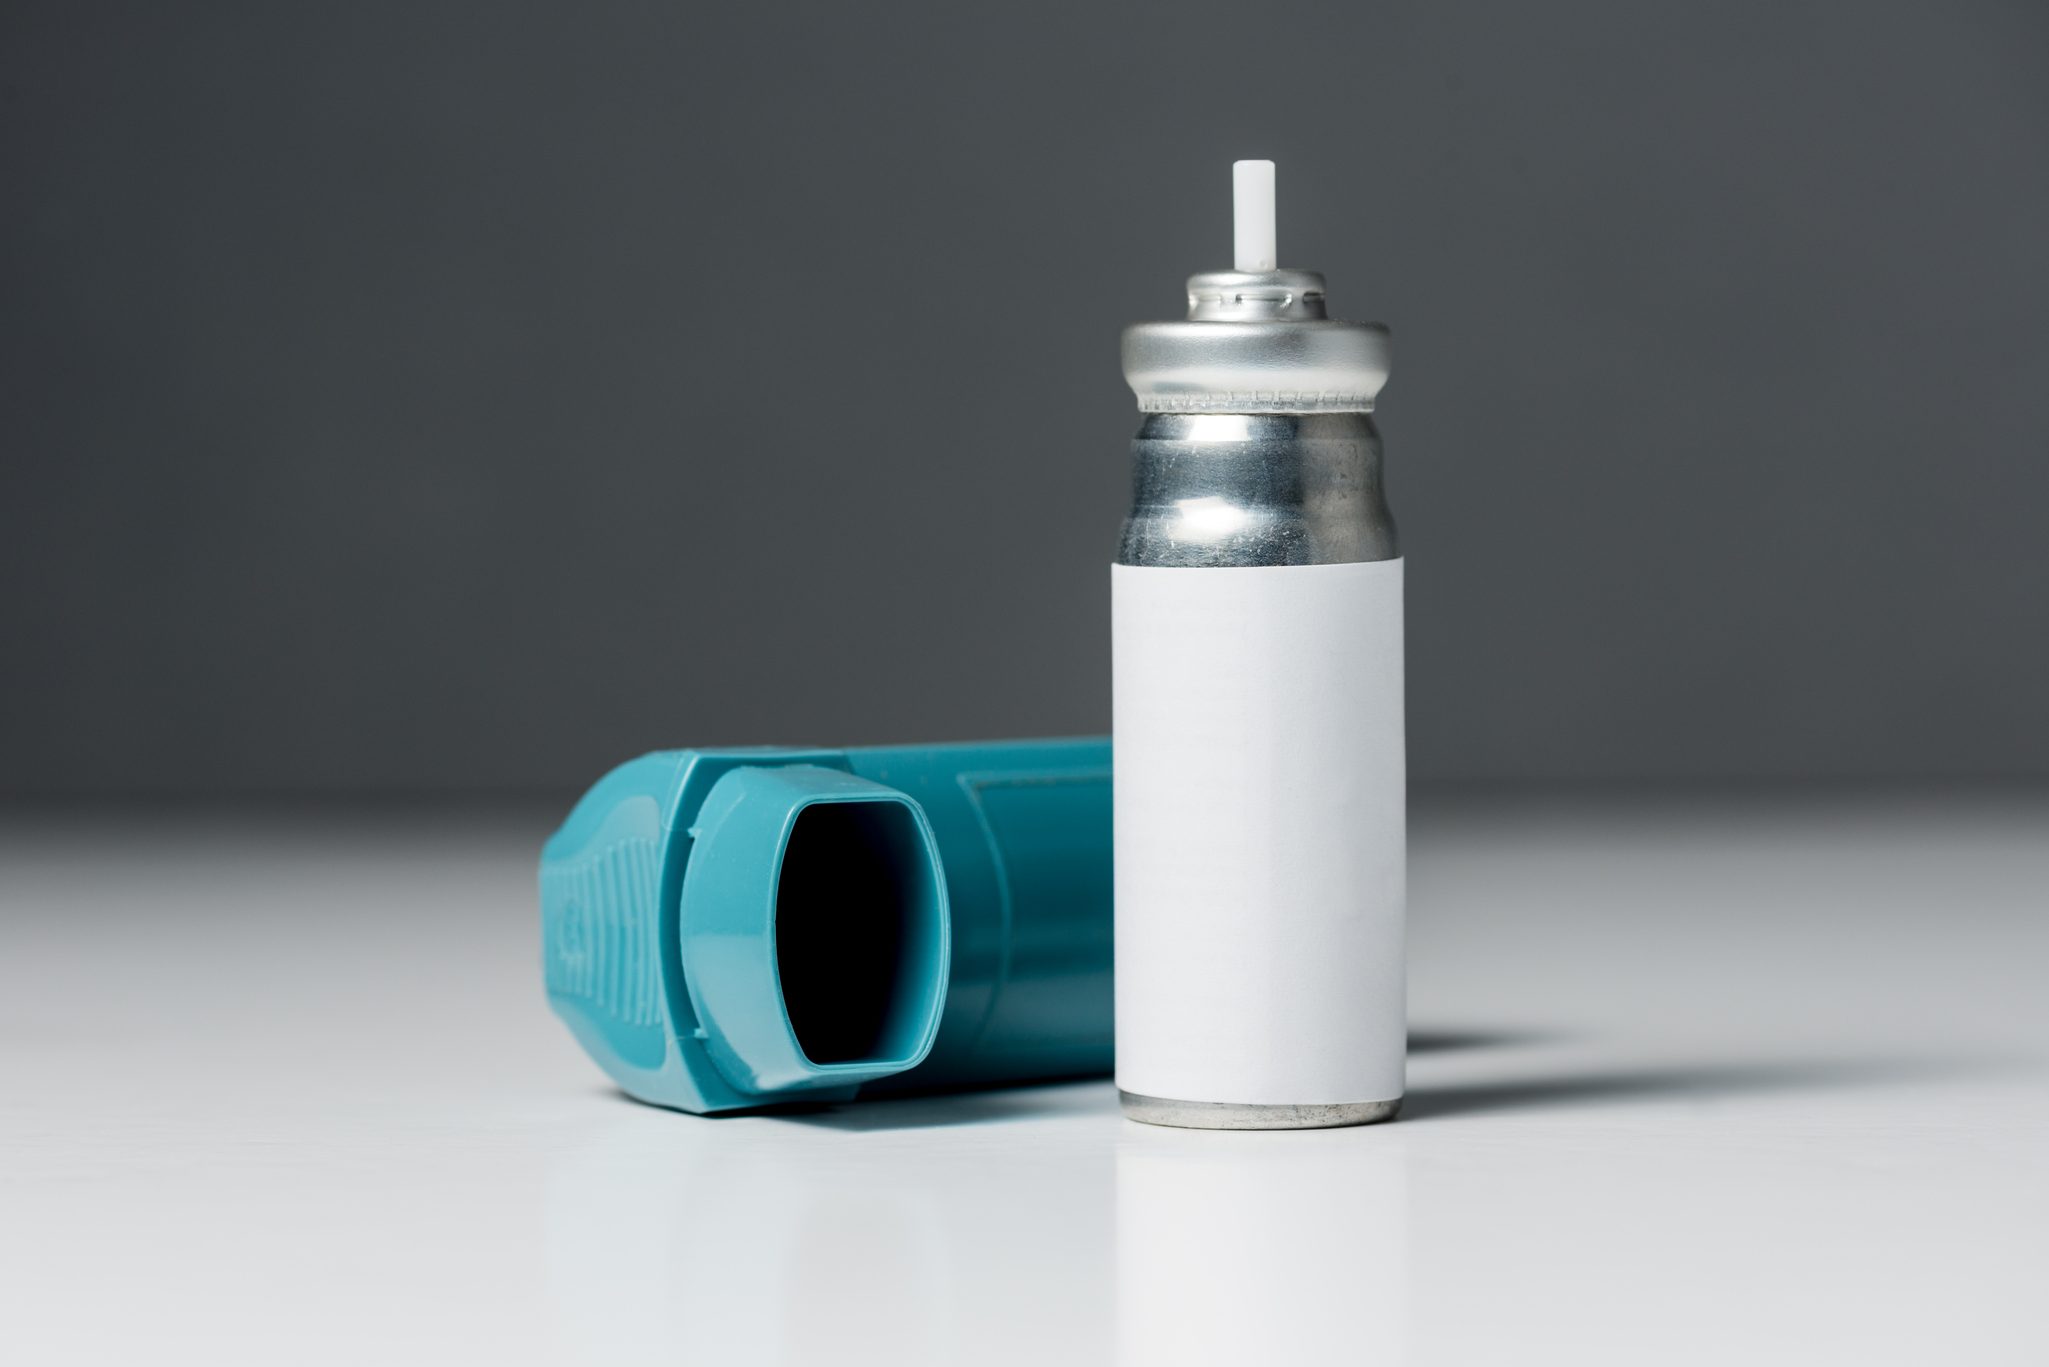 Asthma inhaler and a pressurised gas cannister refill. (Getty Image)